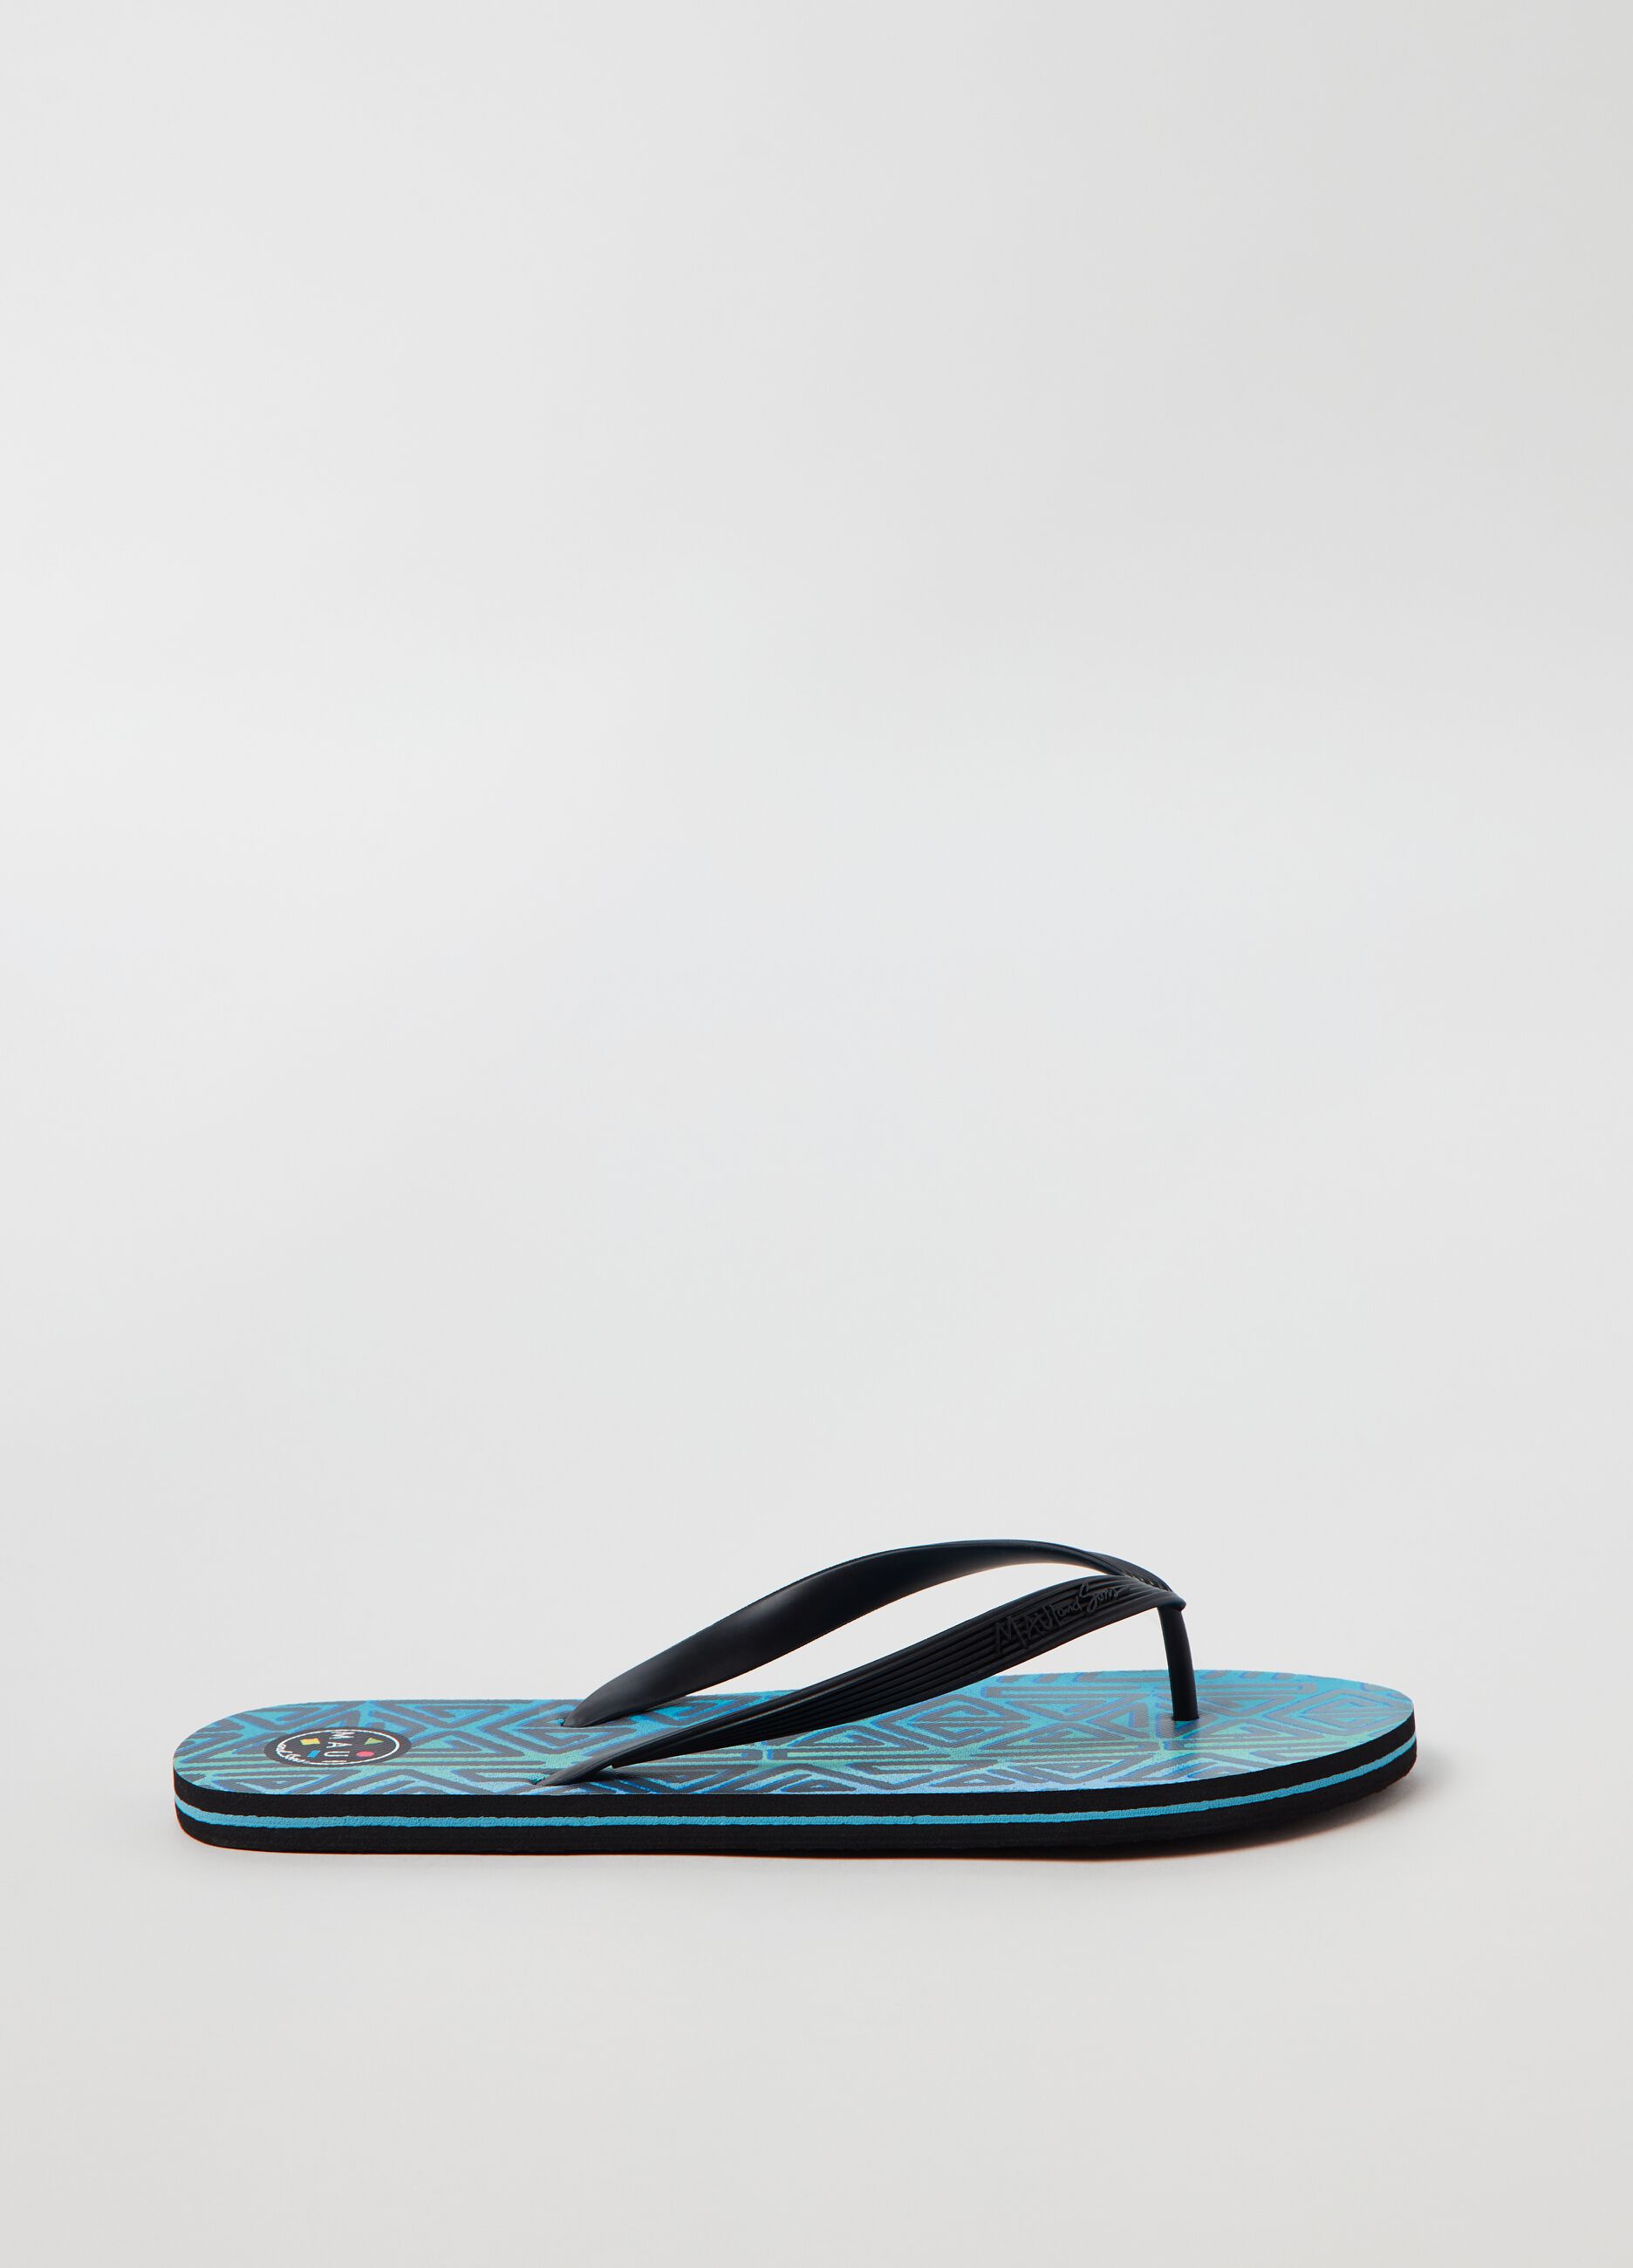 Floral print thong sandal by Maui and Sons